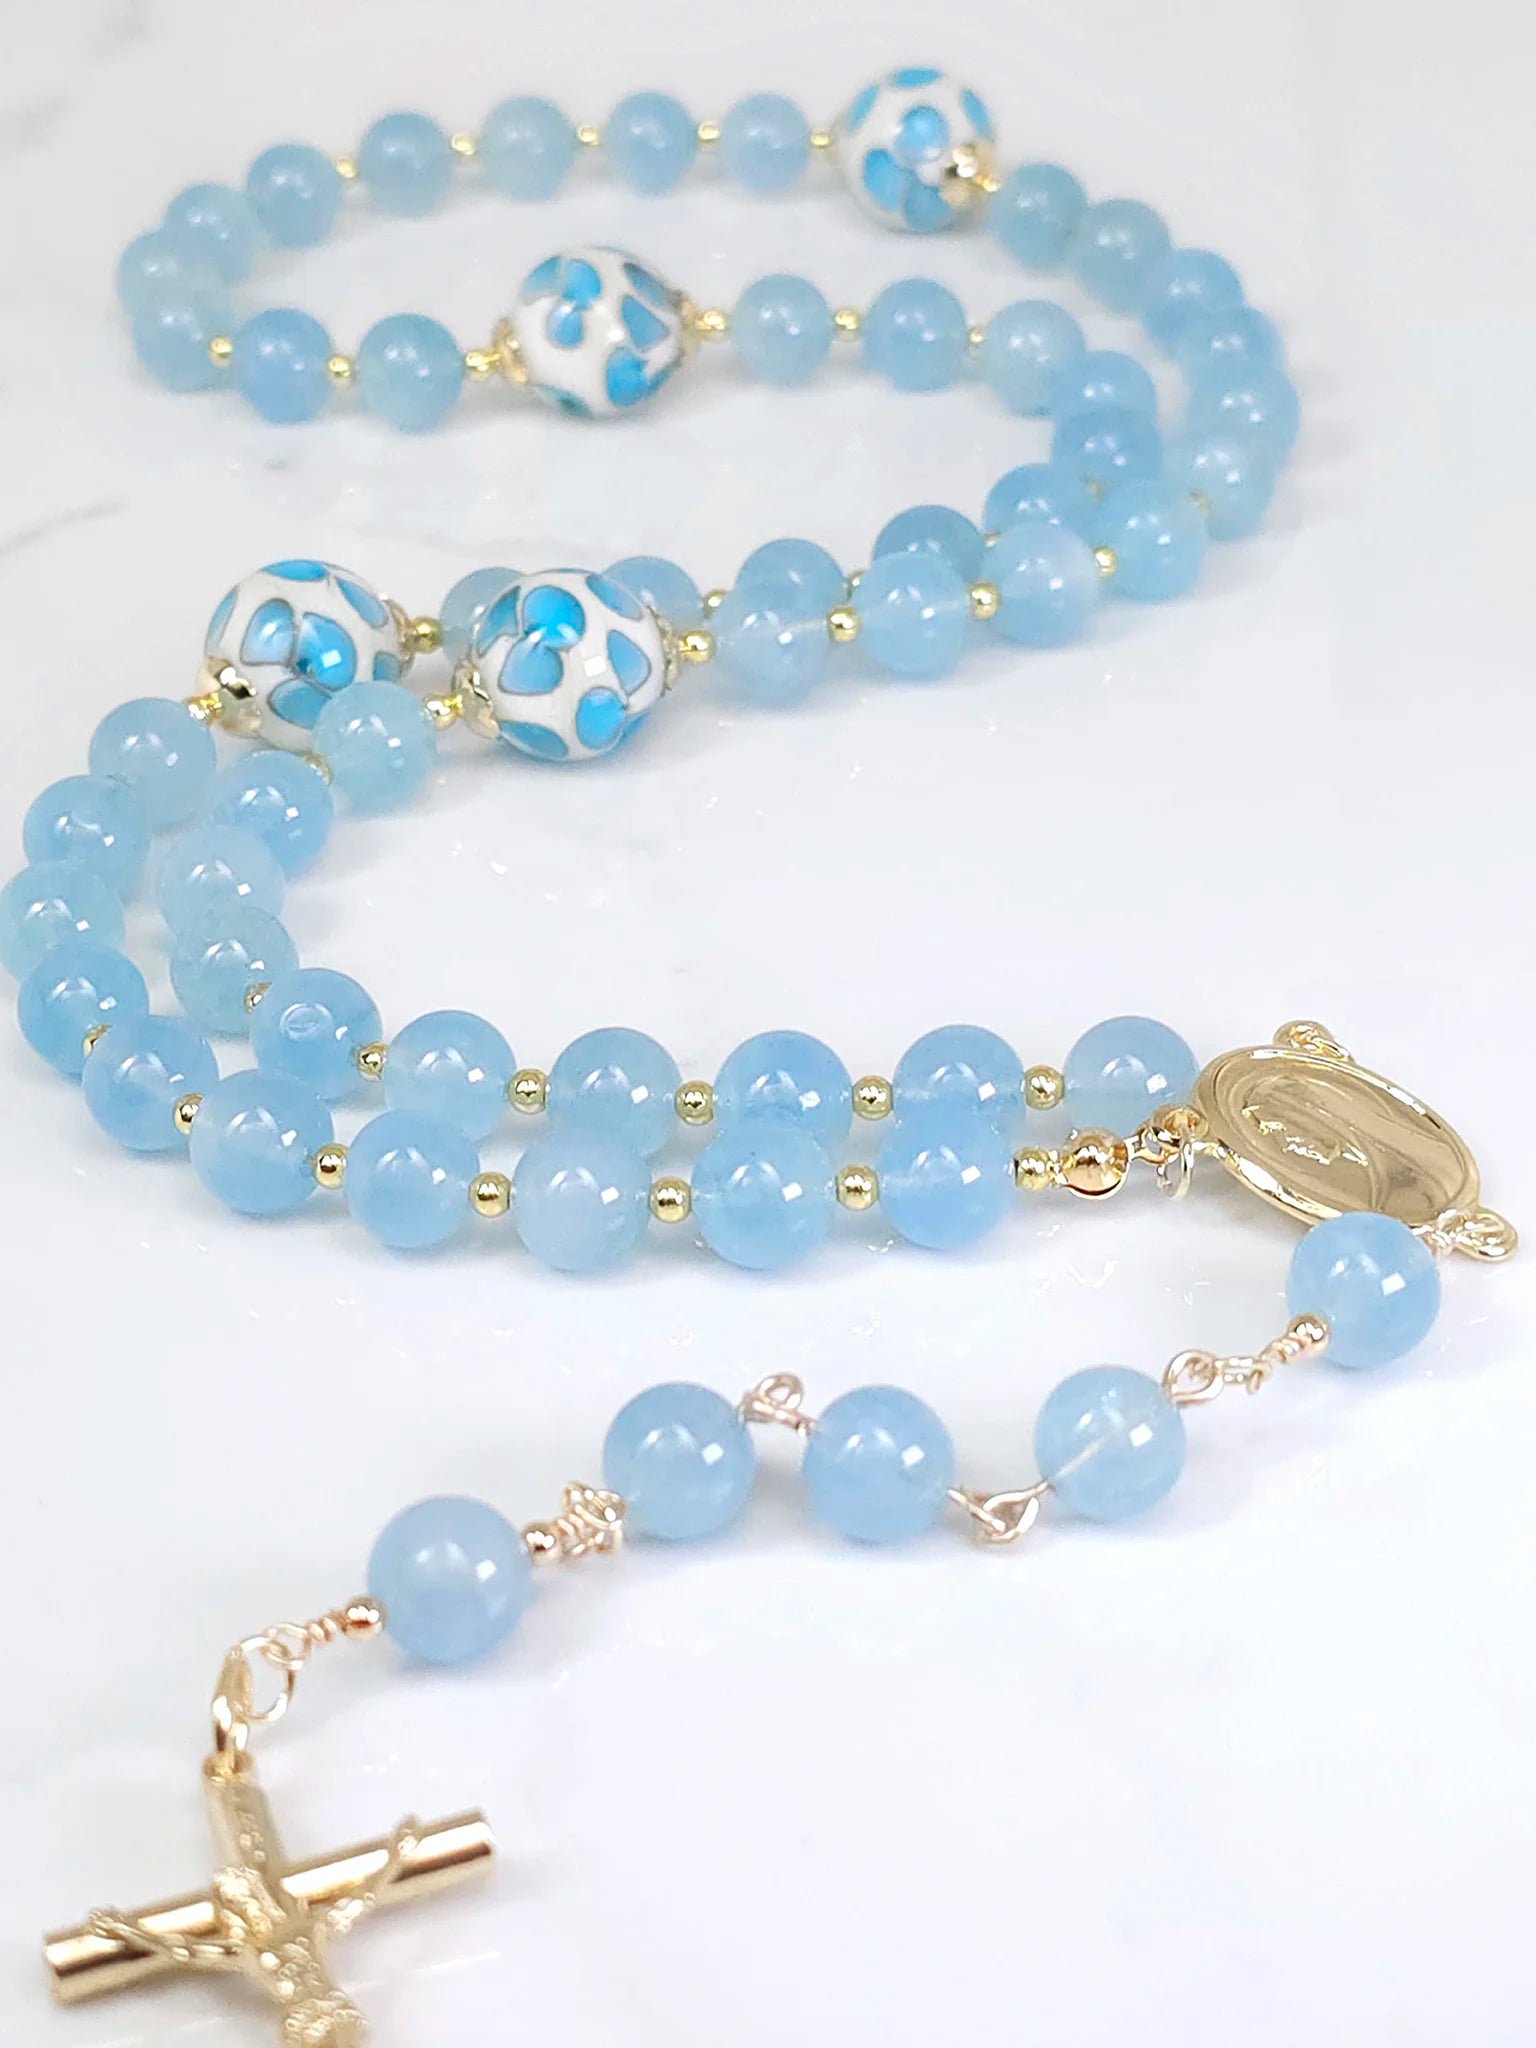 Necklace rosary made of shimmering beads, highlighted by a Gold-plated Madonna medal centerpiece, draped on a white table.